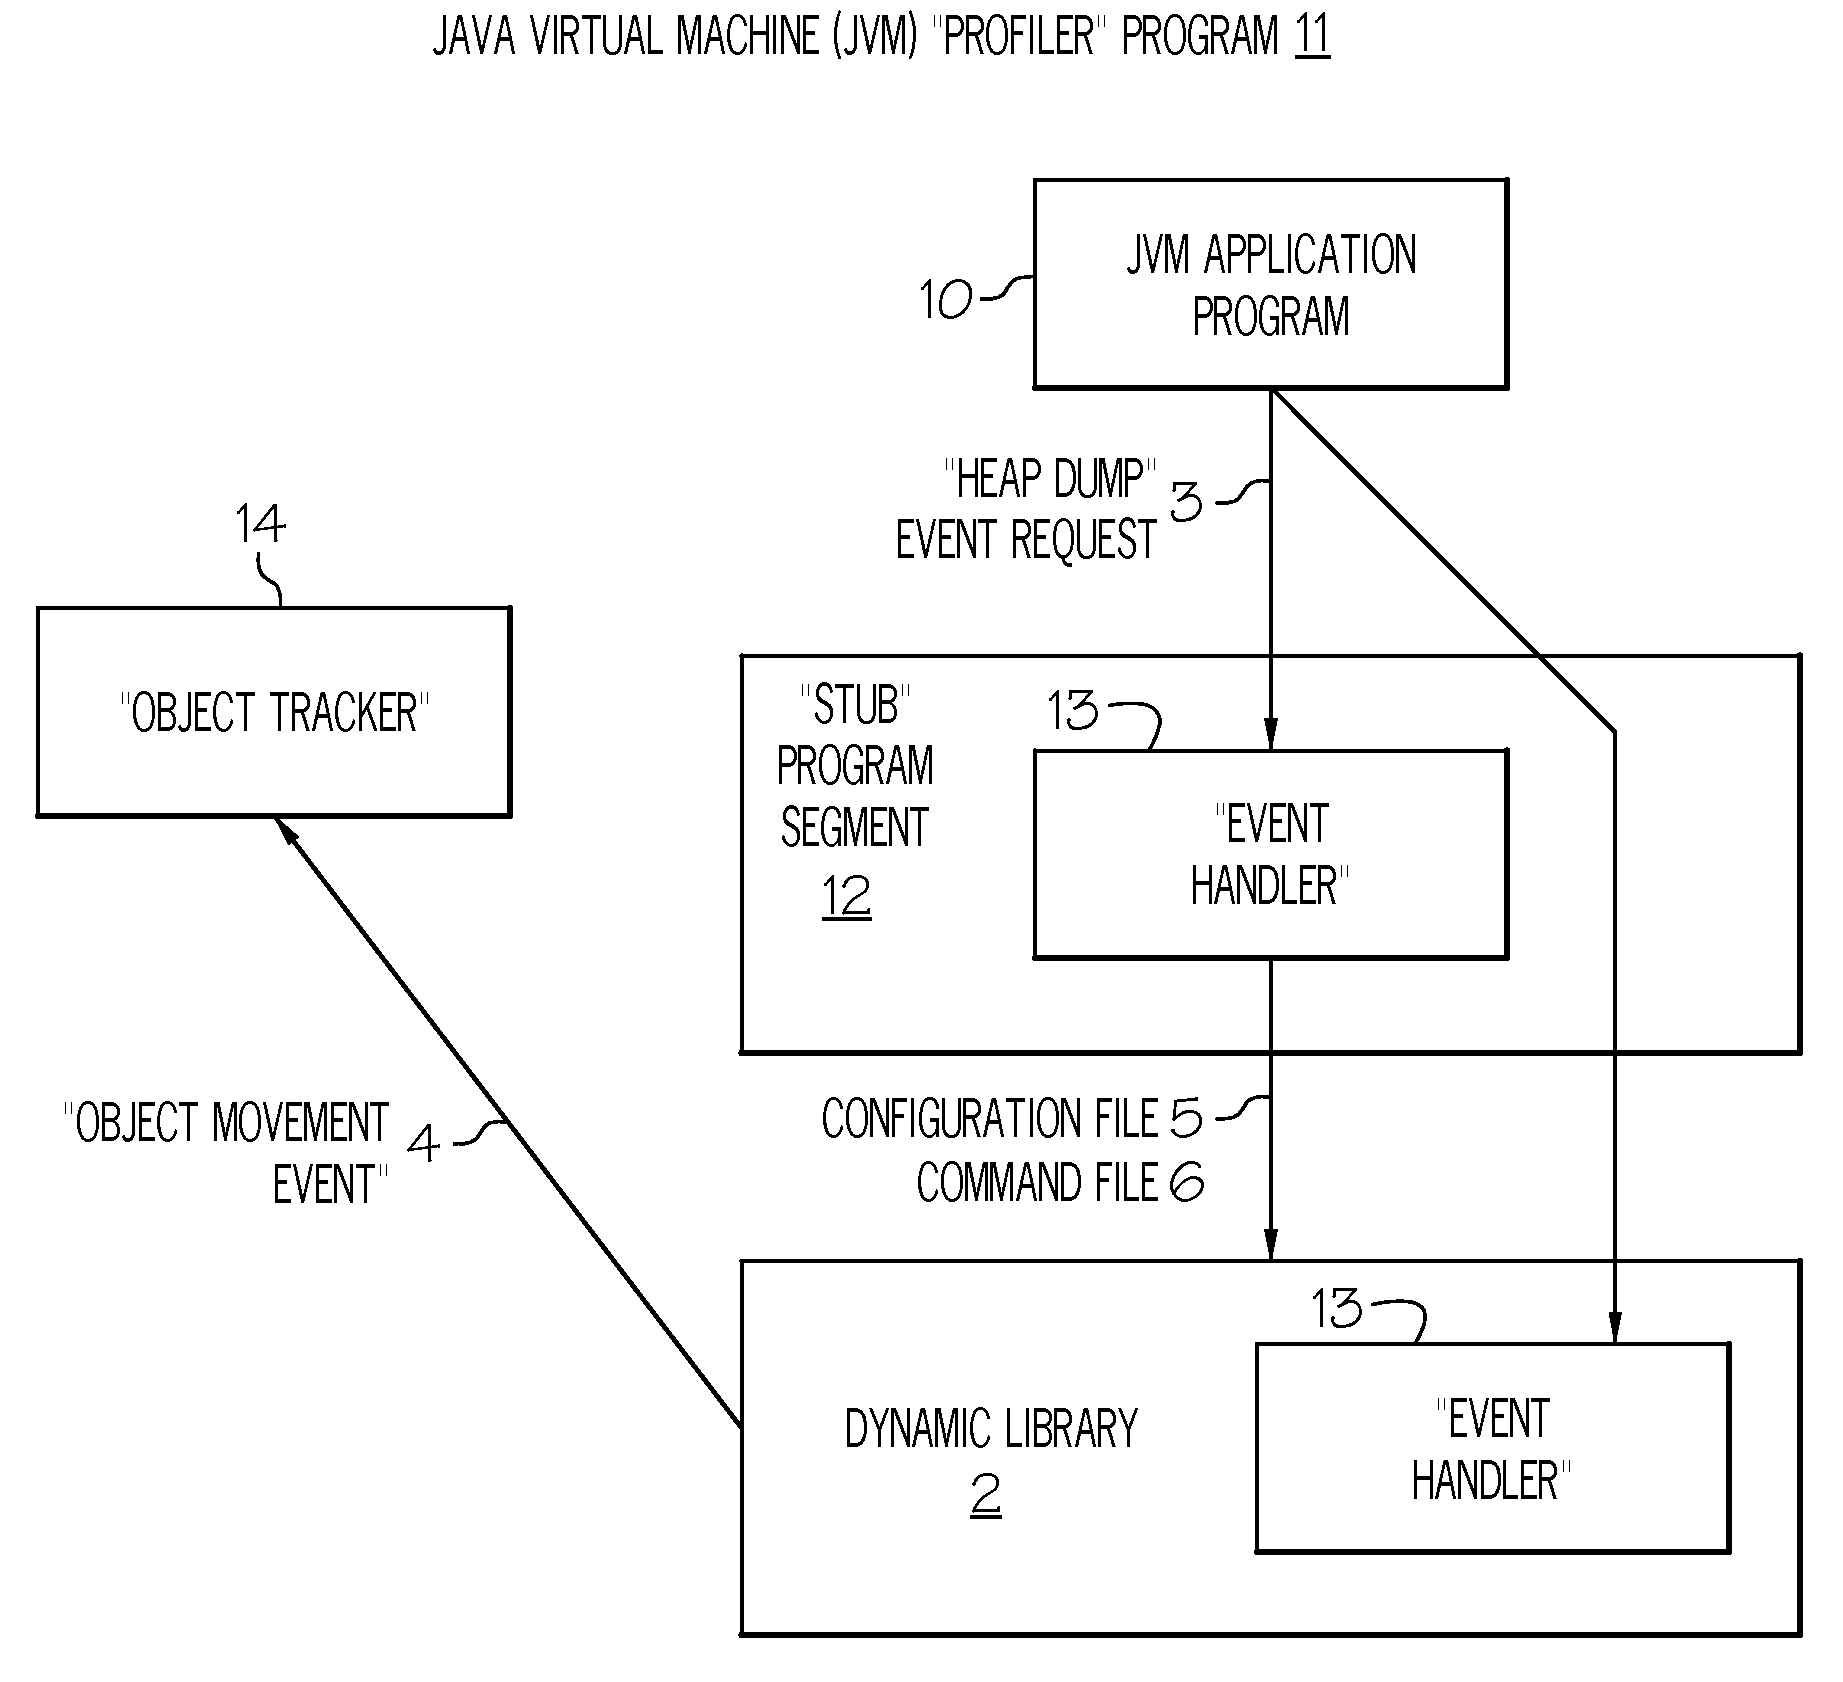 Method and system for analyzing memory leaks occurring in JAVA virtual machine data storage heaps